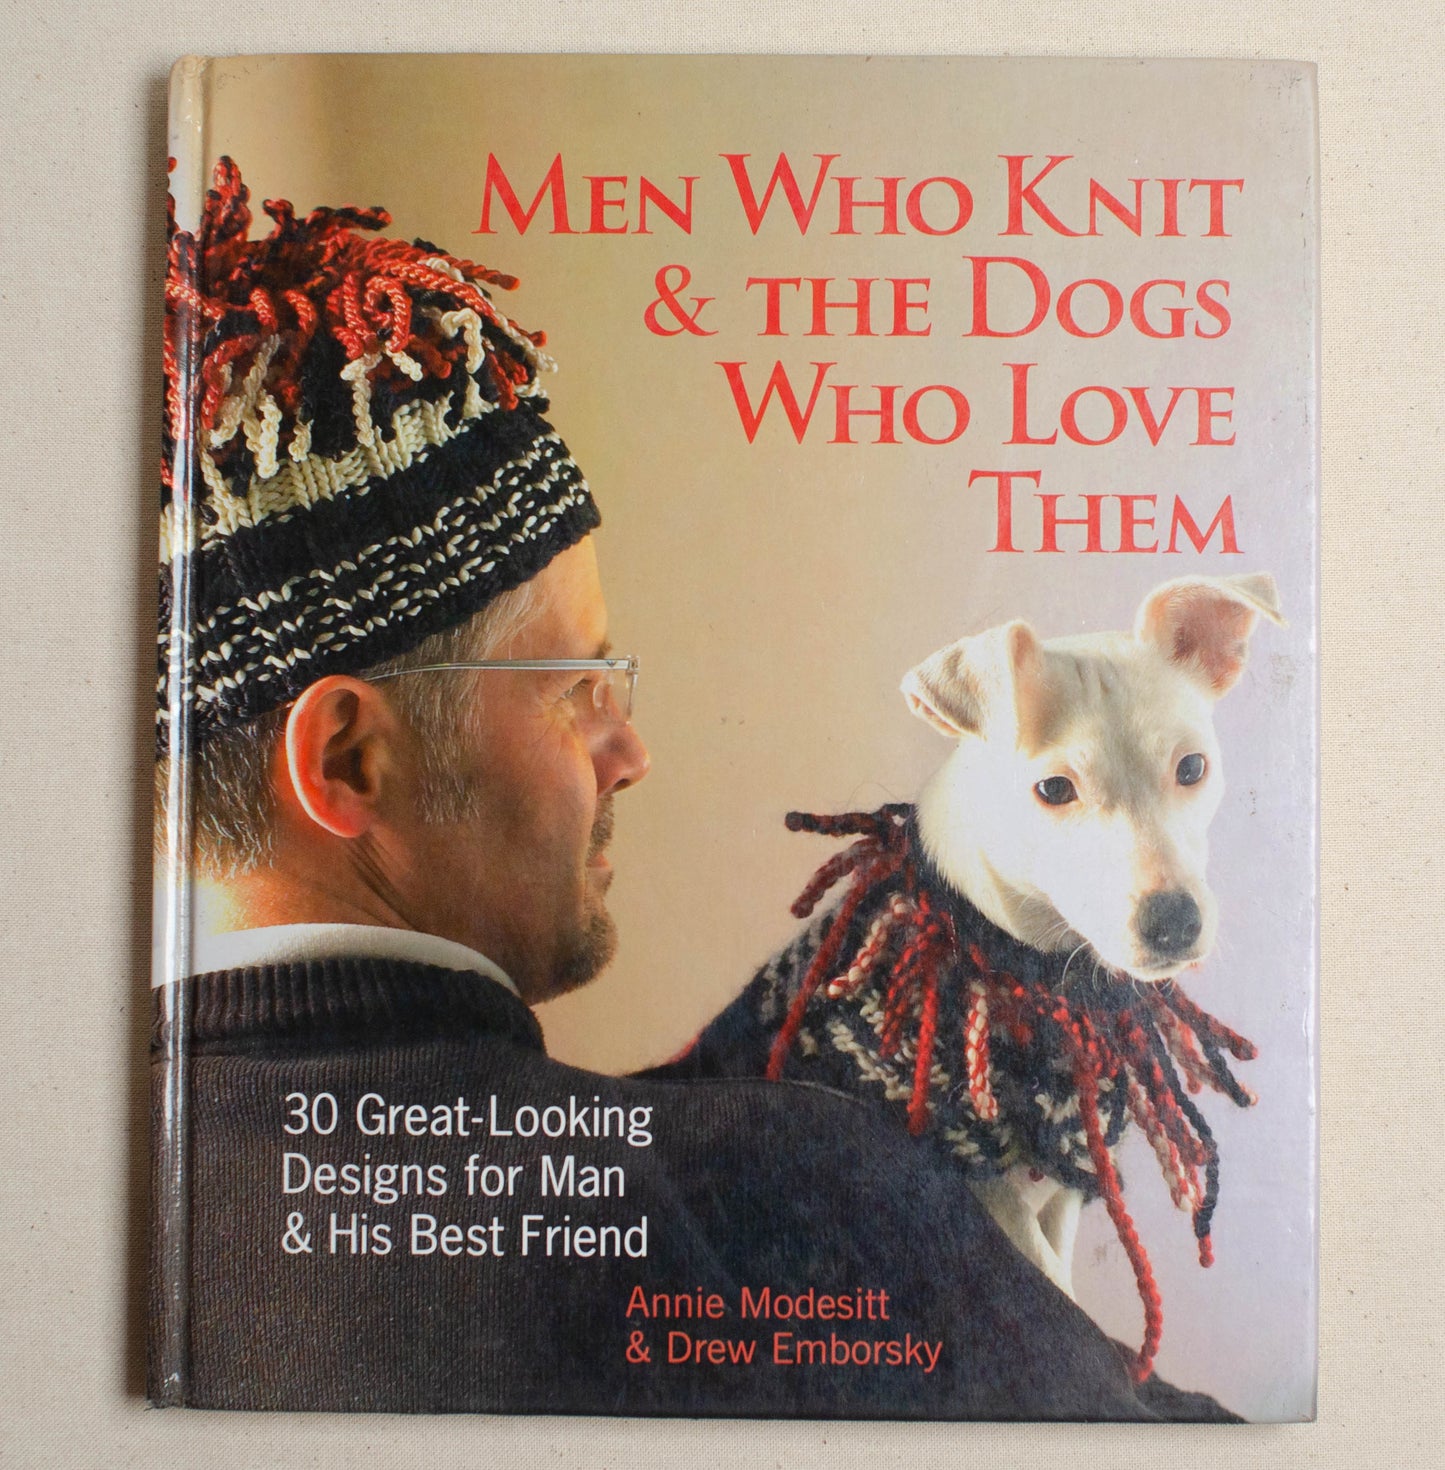 Men Who Knit The Dogs Who Love Them: 30 Great-Looking Designs for Man His Best Friend